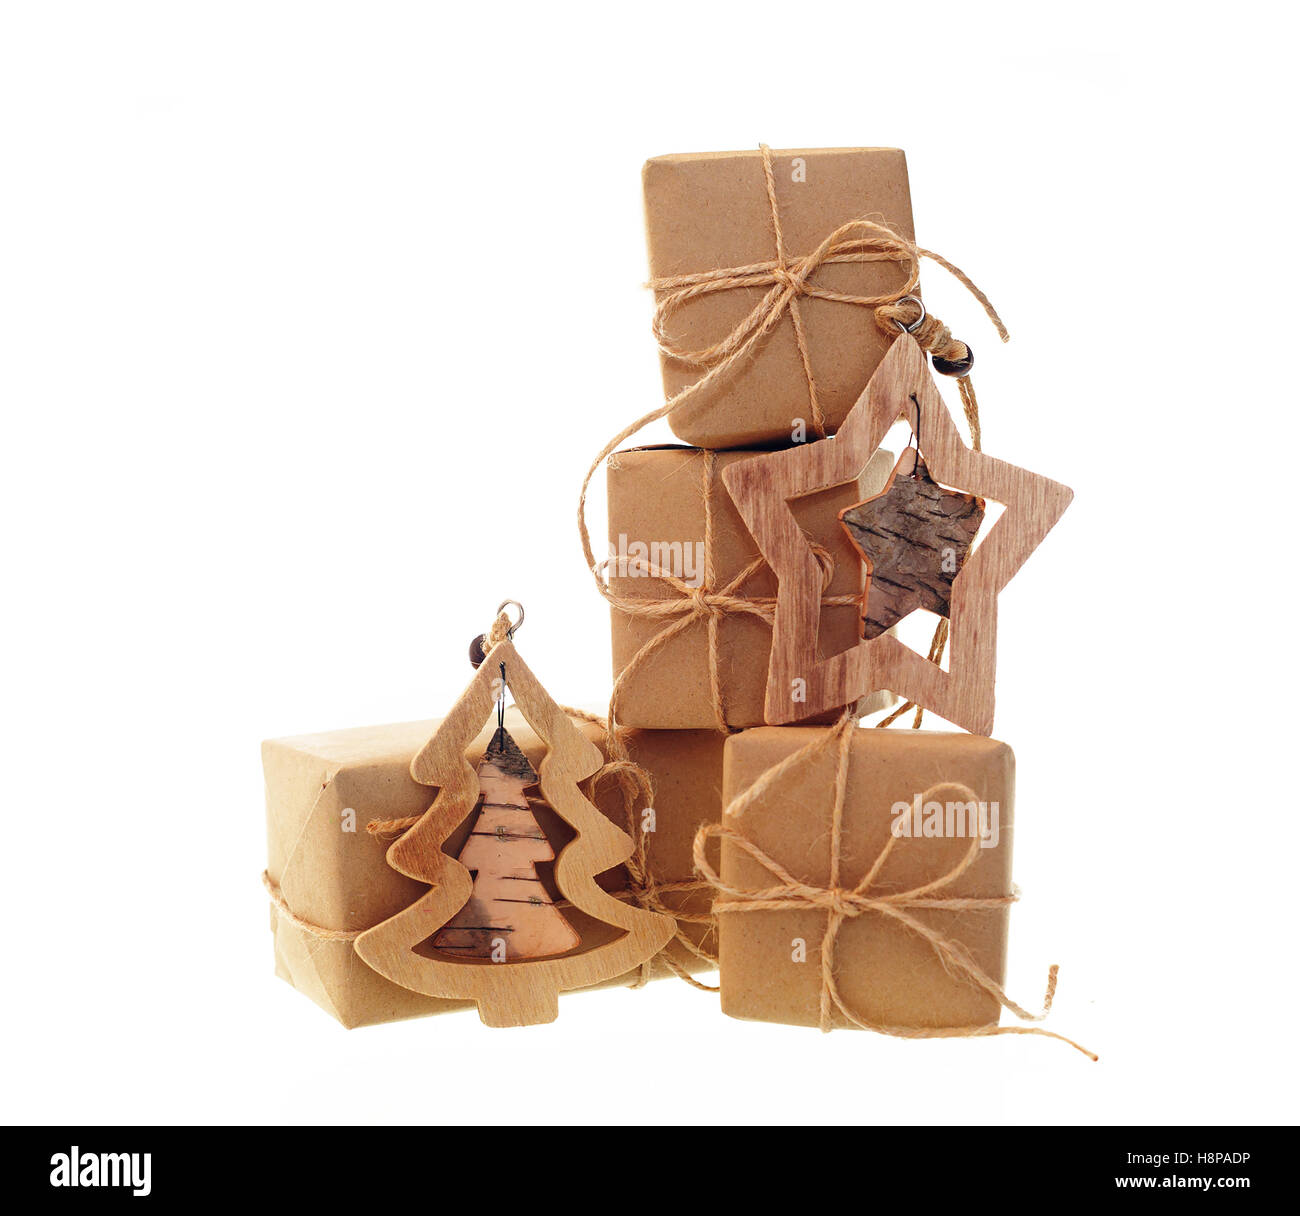 gift boxes with kraft paper and Christmas Toys isolated on white background Stock Photo